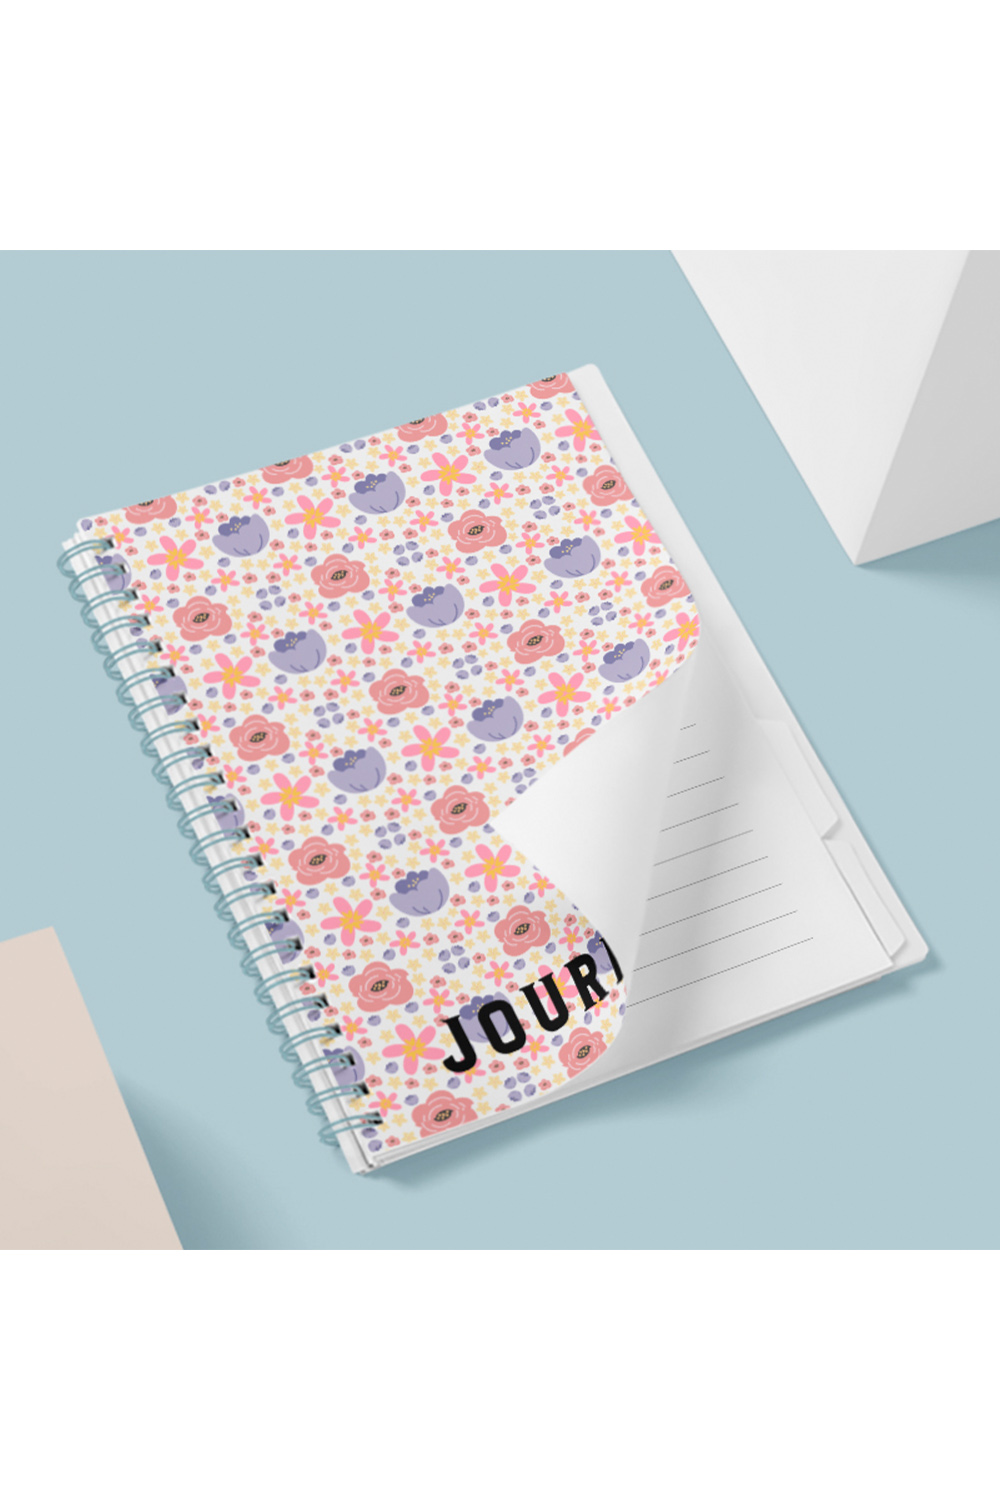 Image of notebook with wonderful floral cover design